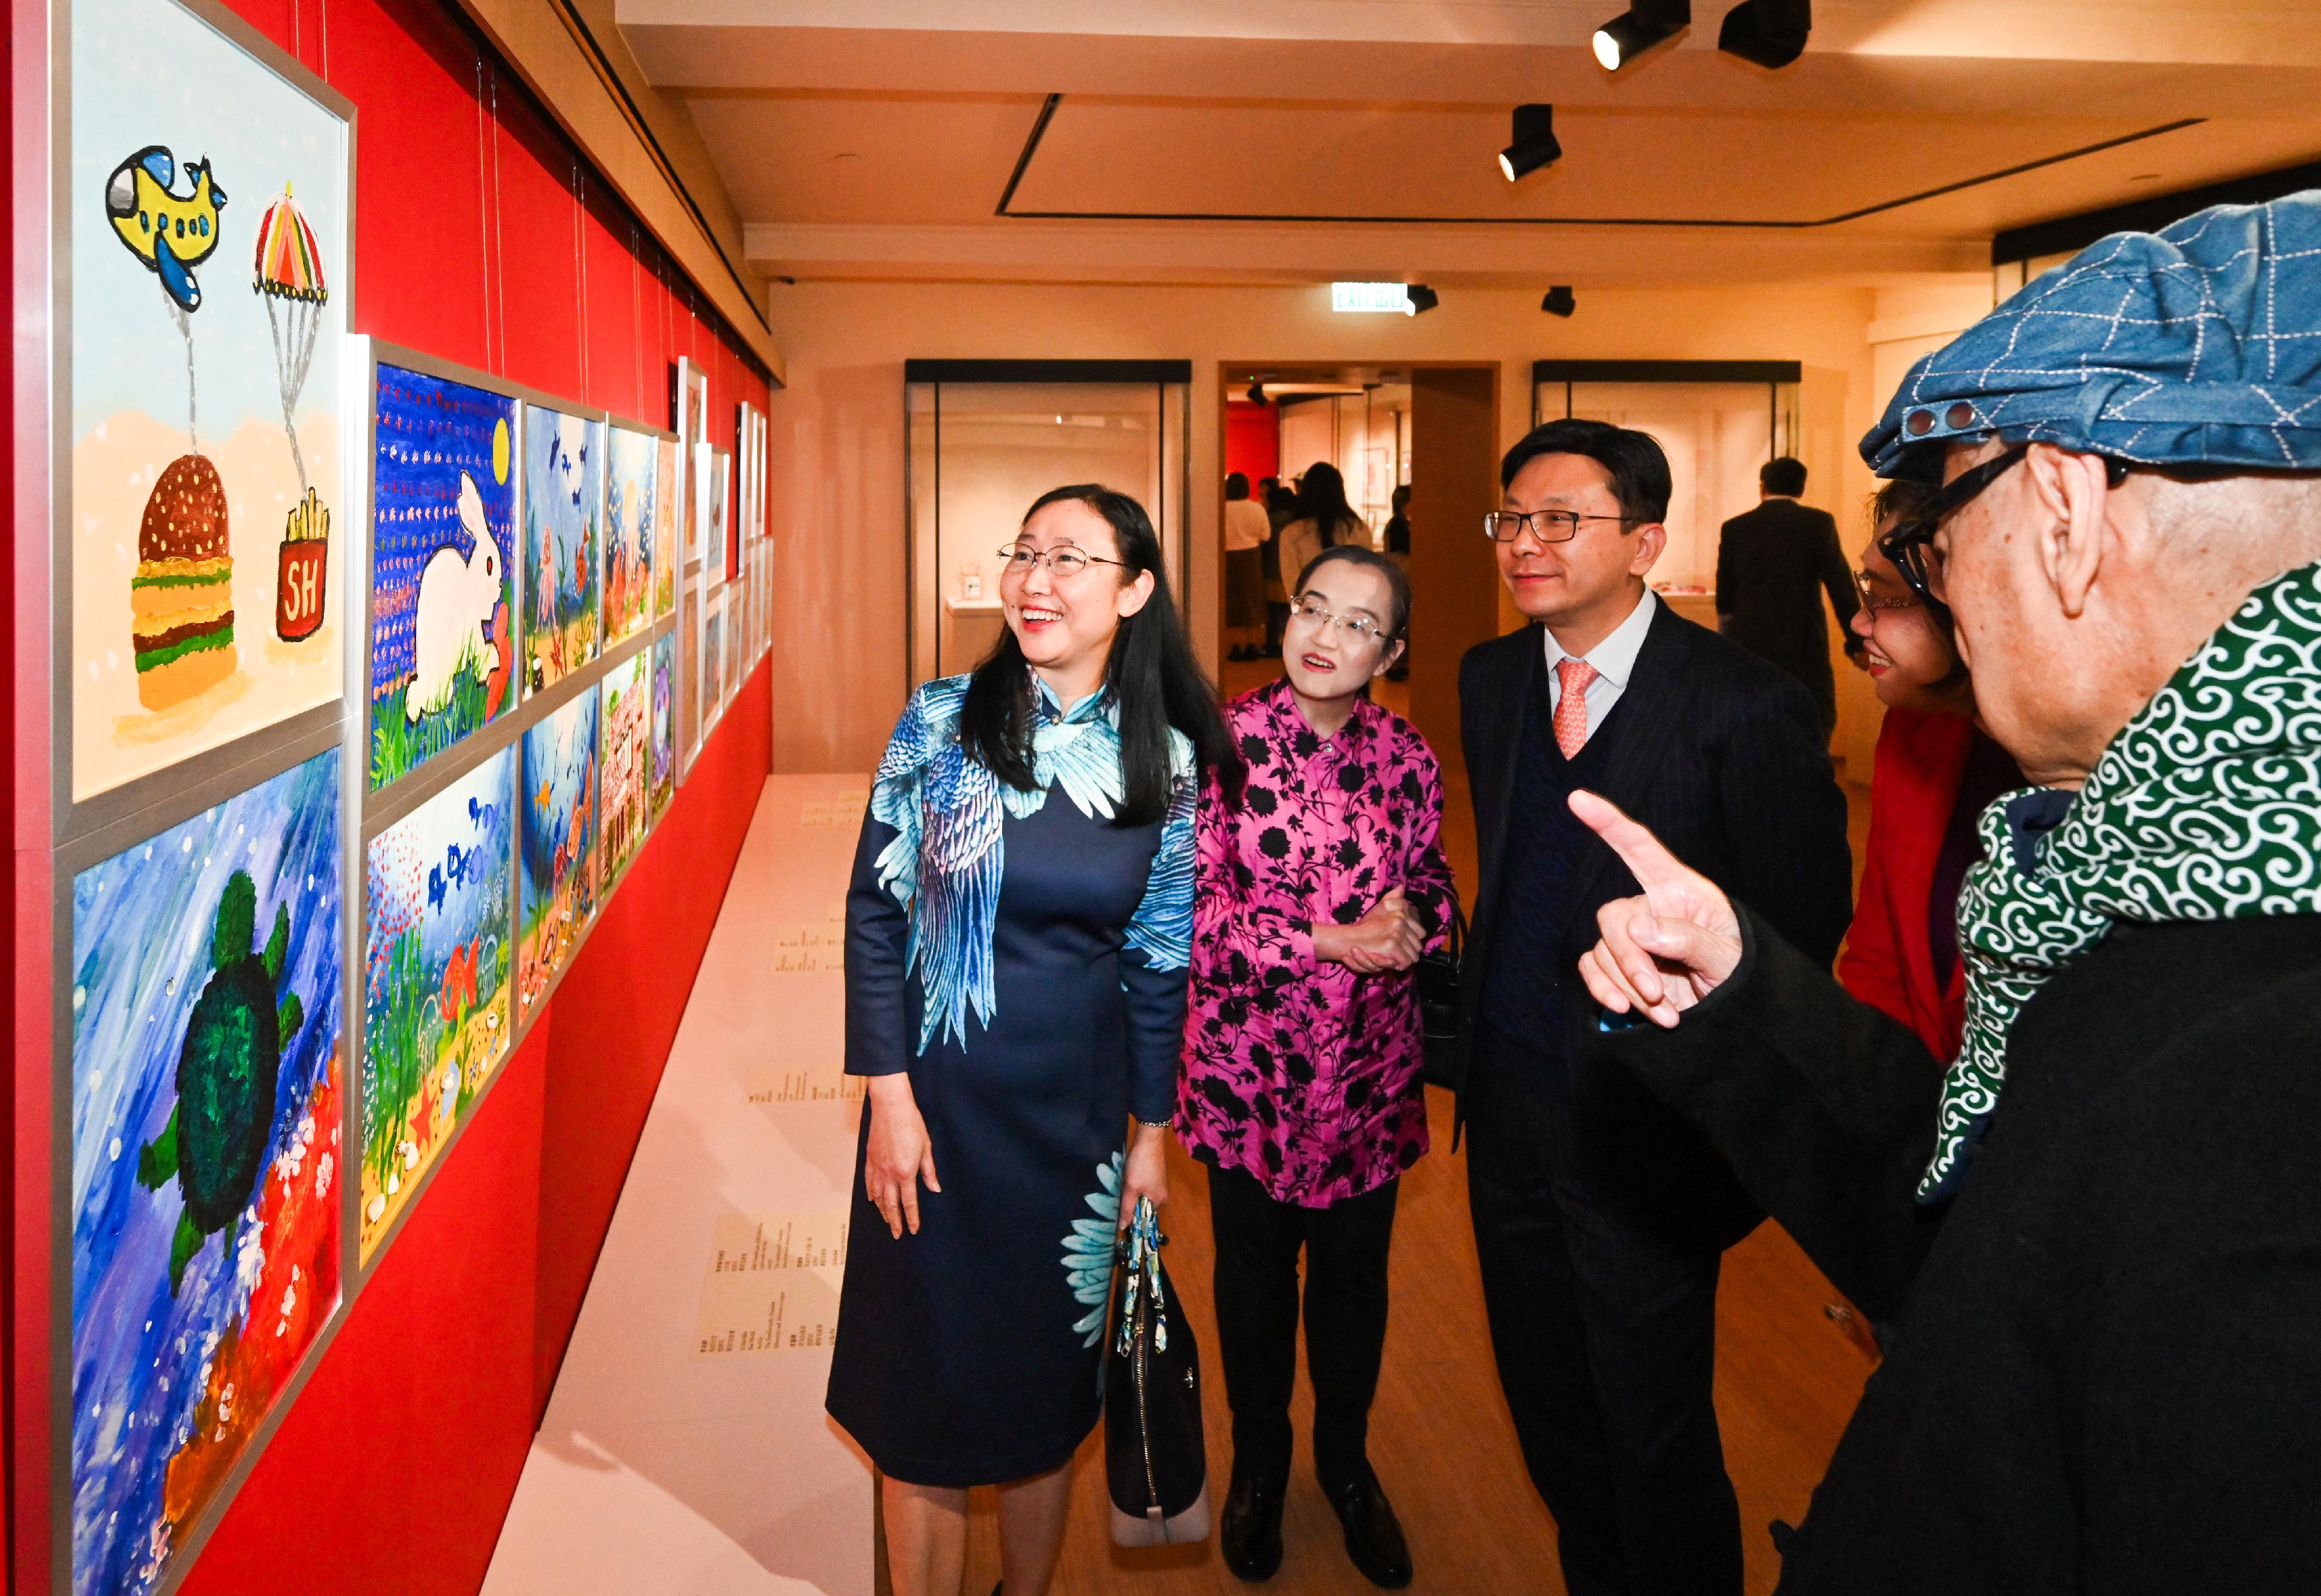 The Opening Ceremony of the "Infinite Creativity in Art" Exhibition, jointly organised by the Labour and Welfare Bureau (LWB), the Social Welfare Department, the Arts Development Fund for Persons with Disabilities  and Sun Museum, was held today (January 11). Photo shows the Secretary for Labour and Welfare, Mr Chris Sun (third left); the Permanent Secretary for Labour and Welfare, Ms Alice Lau (first left); and the Commissioner for Rehabilitation of the LWB, Miss Vega Wong (second left), touring the exhibition.